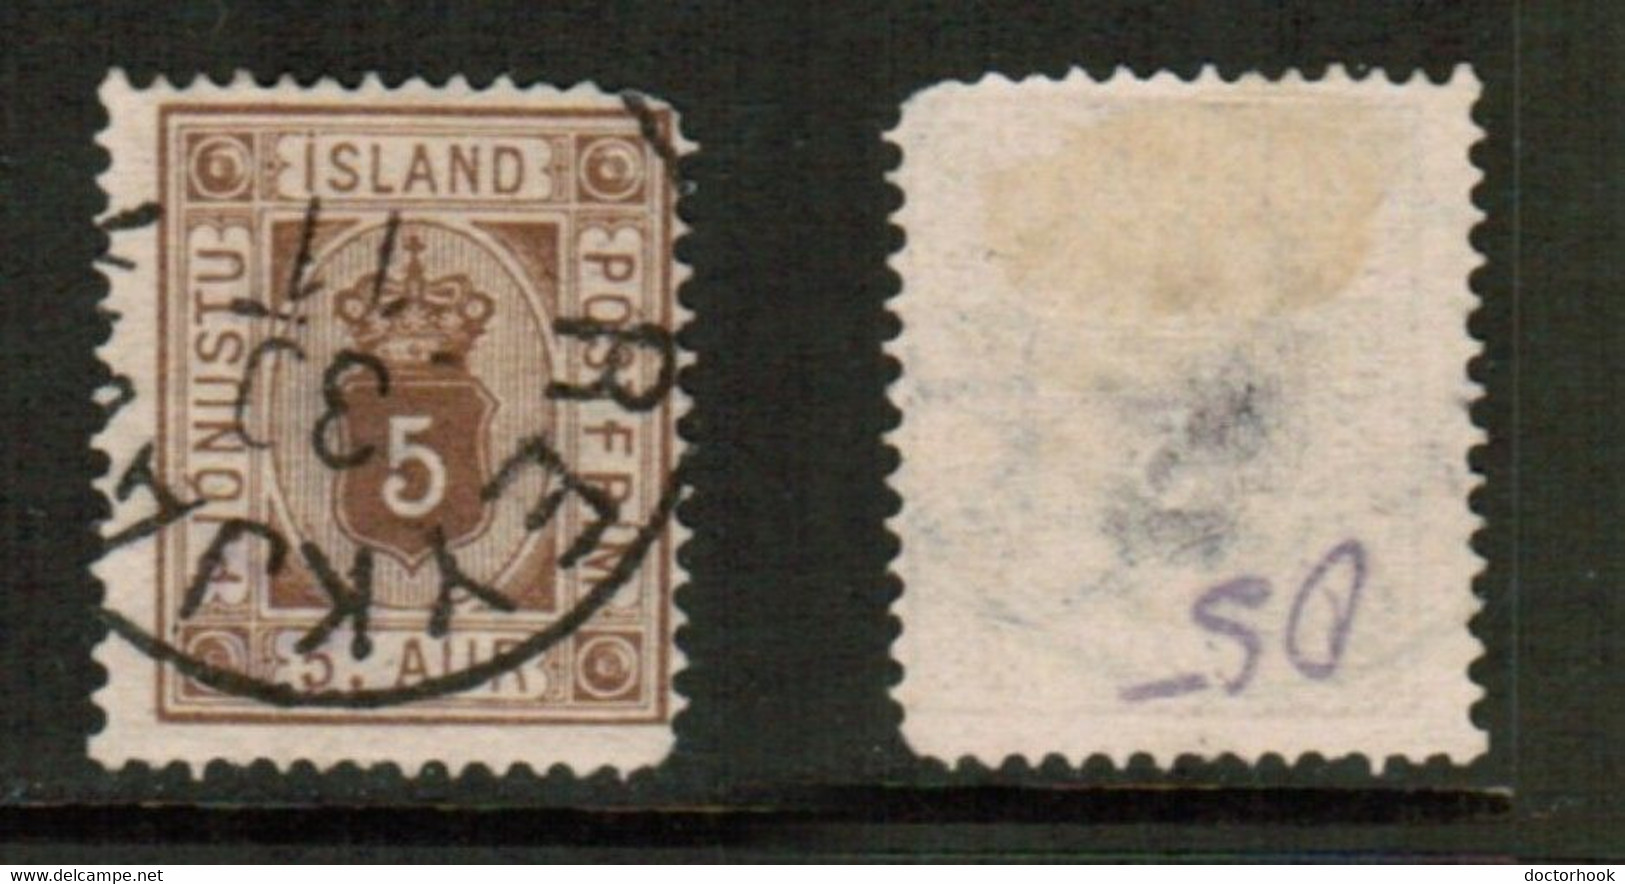 DENMARK   Scott # O 5 USED (CONDITION AS PER SCAN) (Stamp Scan # 867-18) - Officials